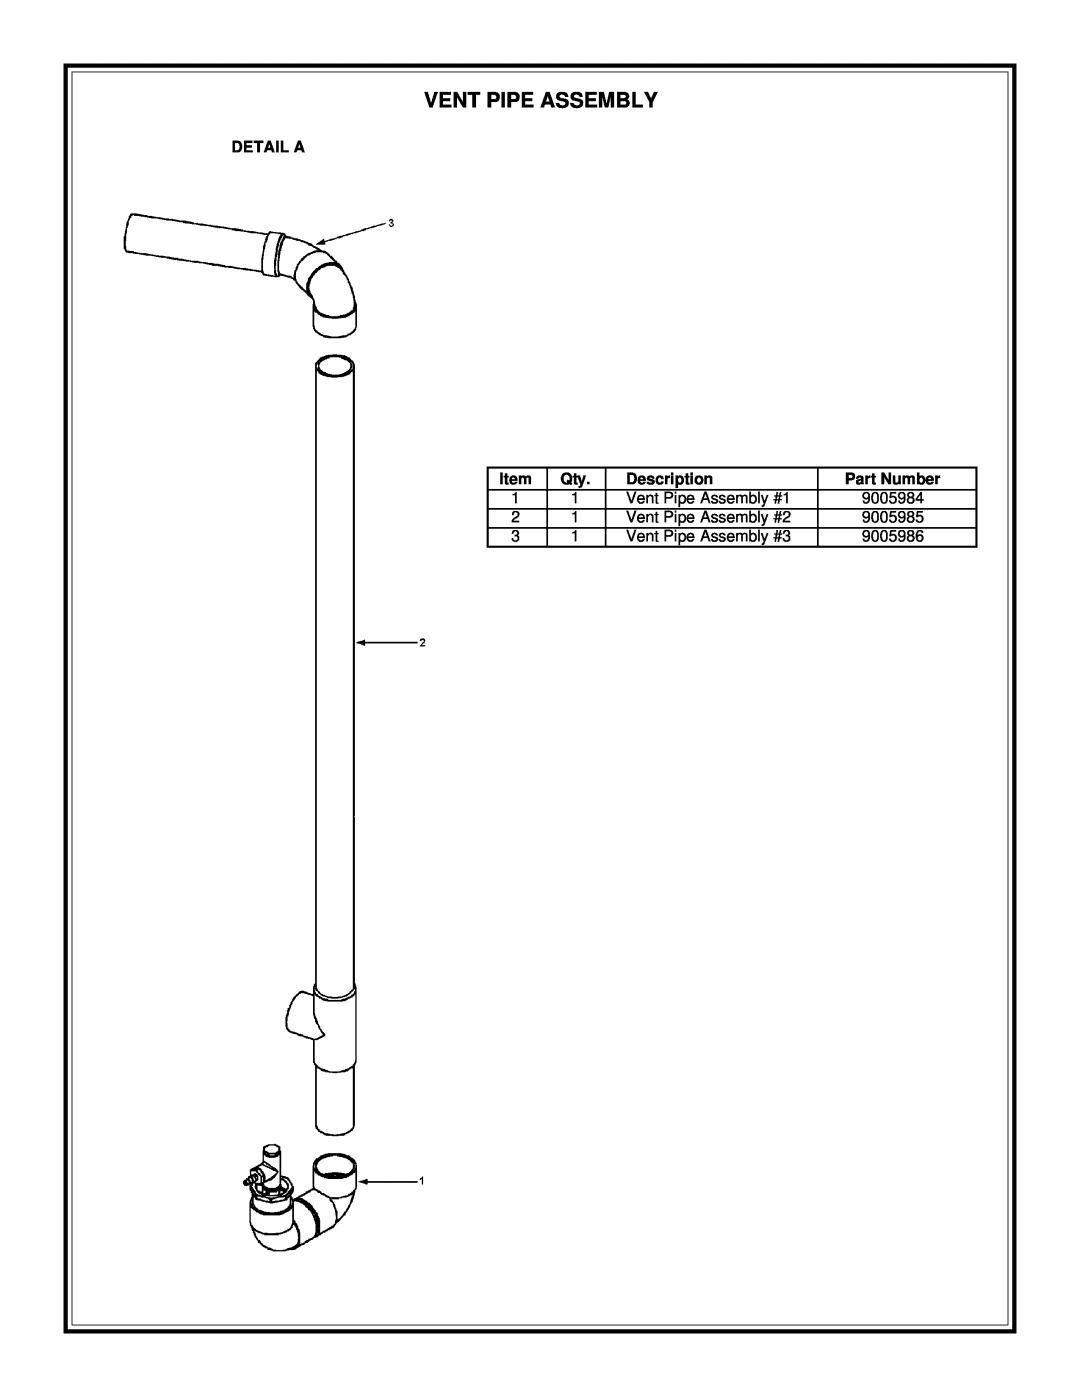 A.O. Smith AOS GPHE-50 manual Detail A, Description, Part Number, Vent Pipe Assembly #1, Vent Pipe Assembly #2 